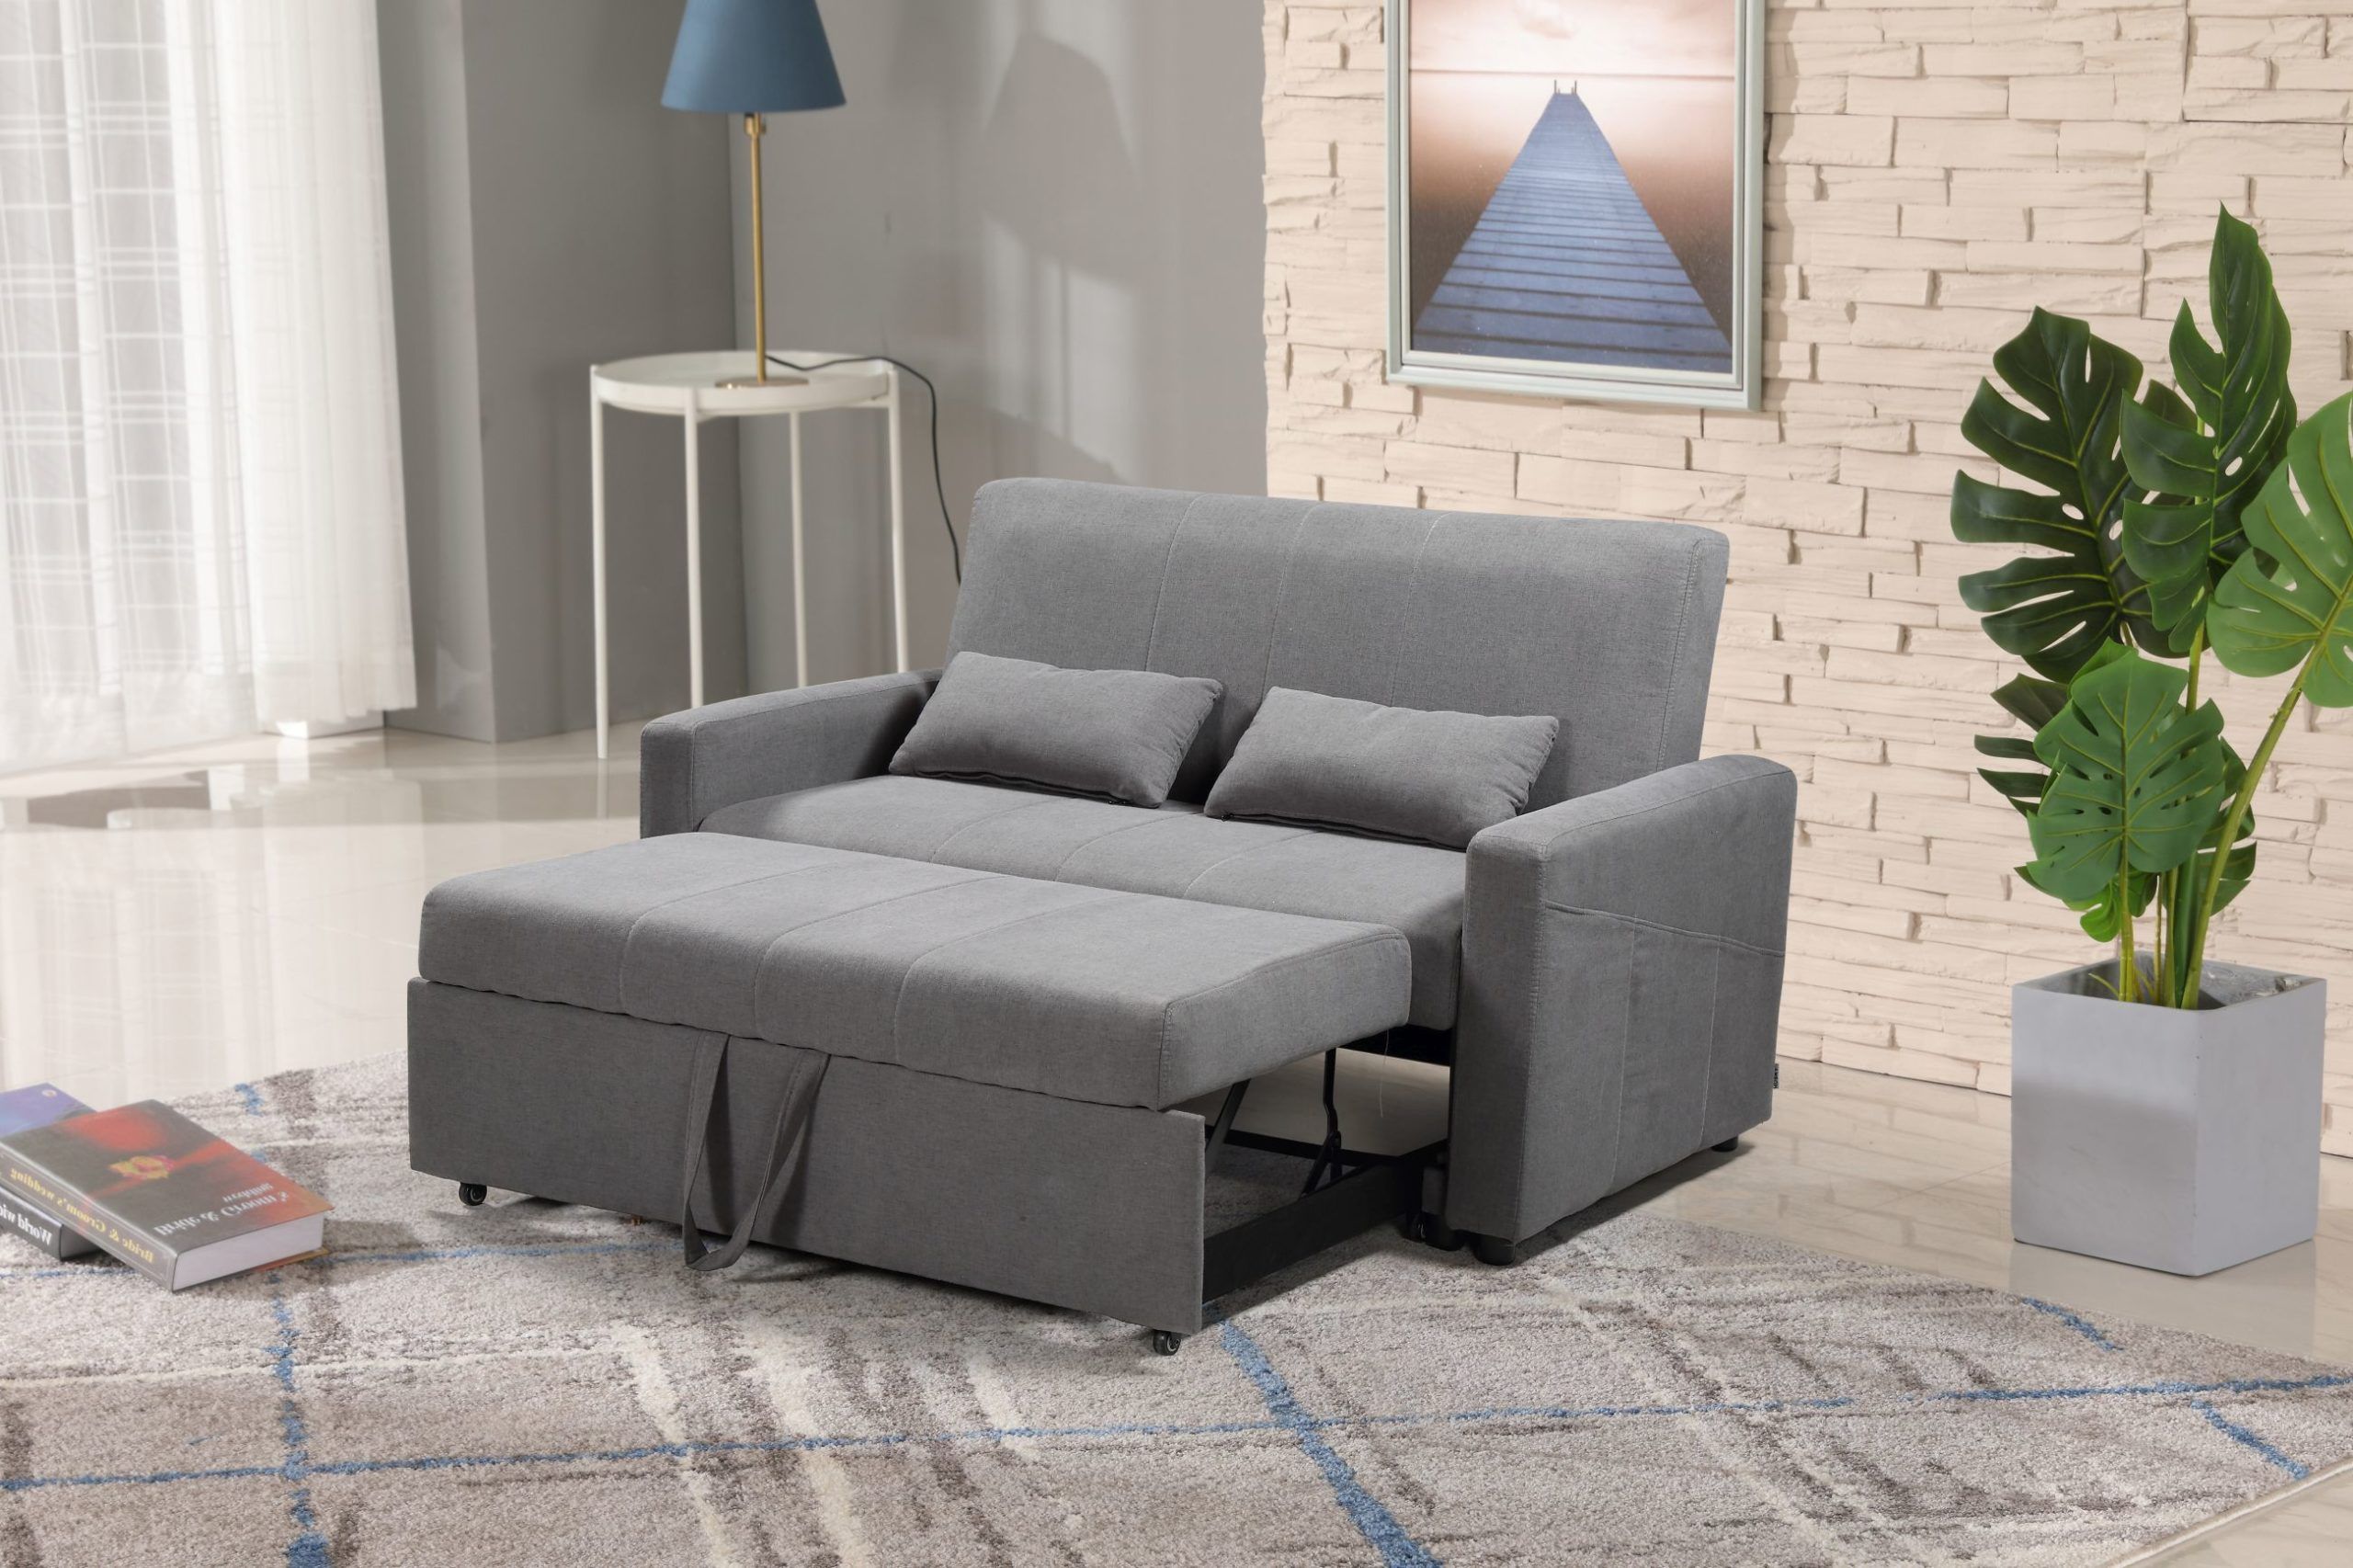 Husky® Transformer Convertible Loveseat Bed – Grey Inside Convertible Gray Loveseat Sleepers (View 2 of 20)